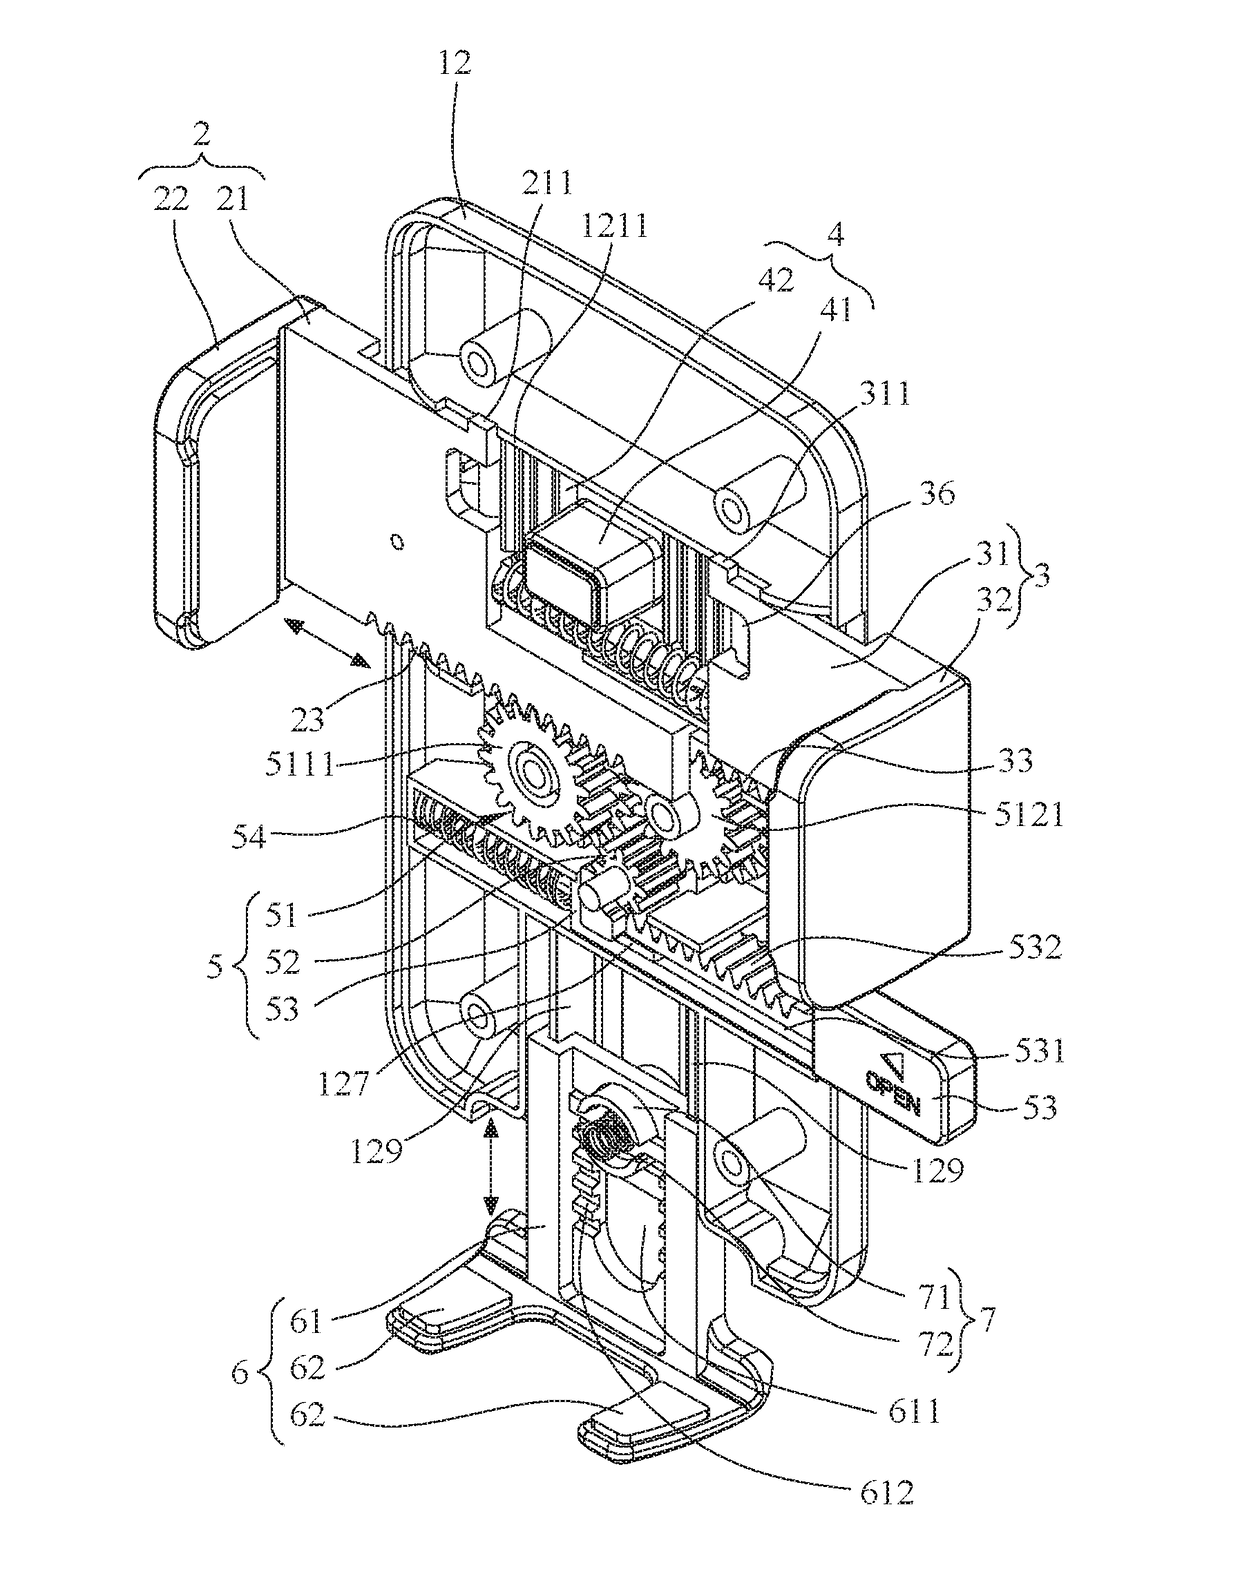 Clamping apparatus for portable electronic device